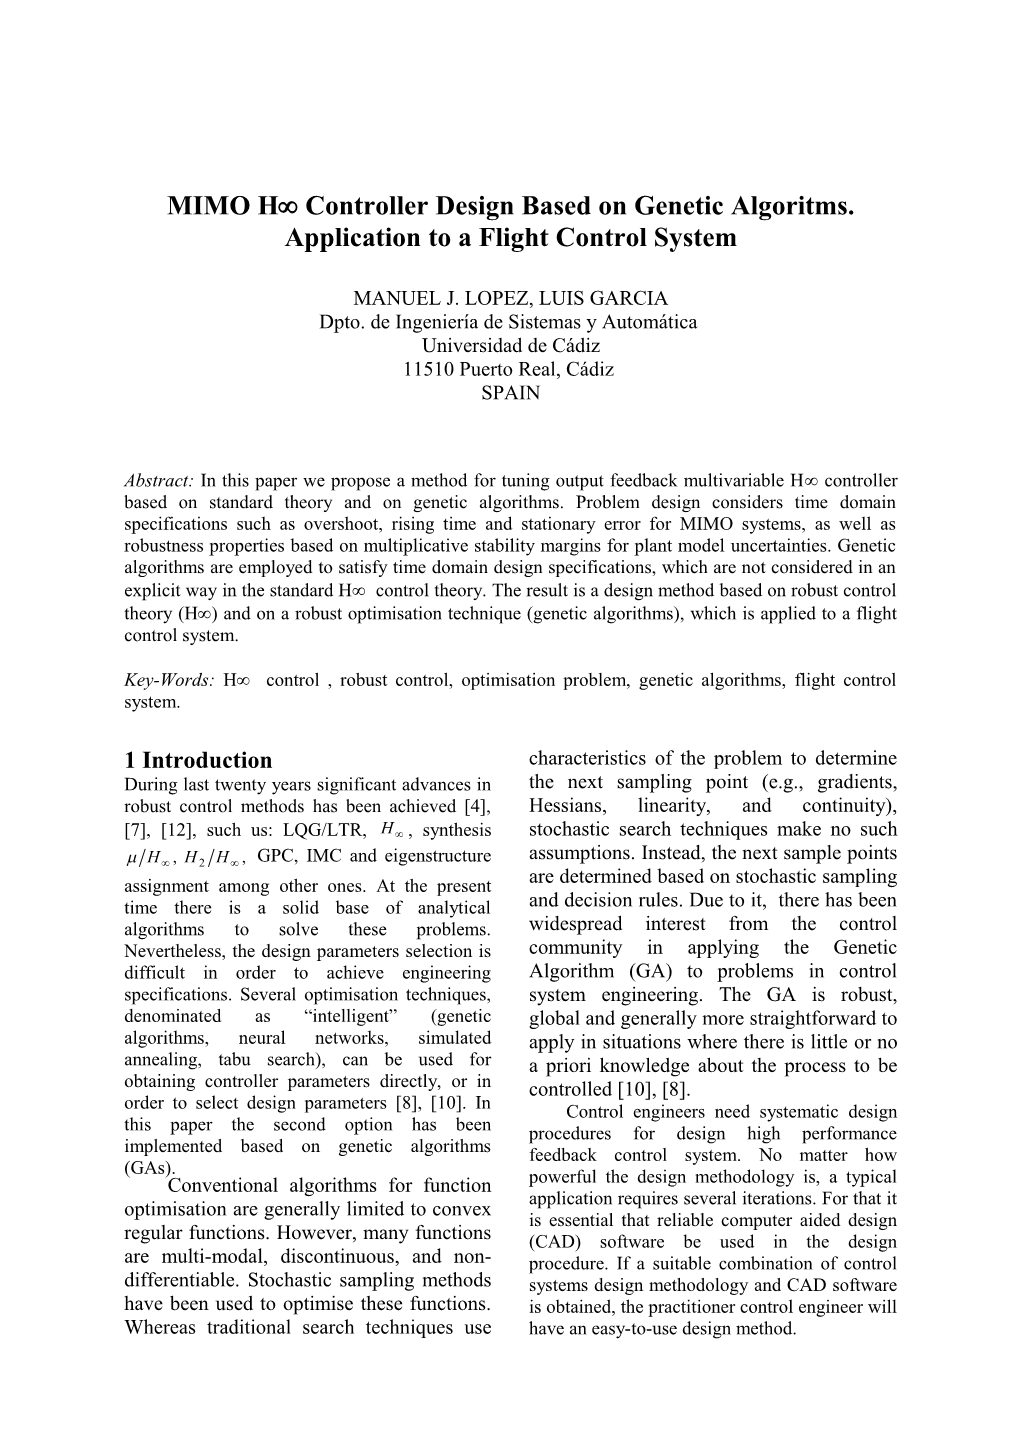 MIMO H Controller Design Based on Genetic Algoritms. Application to a Flight Control System